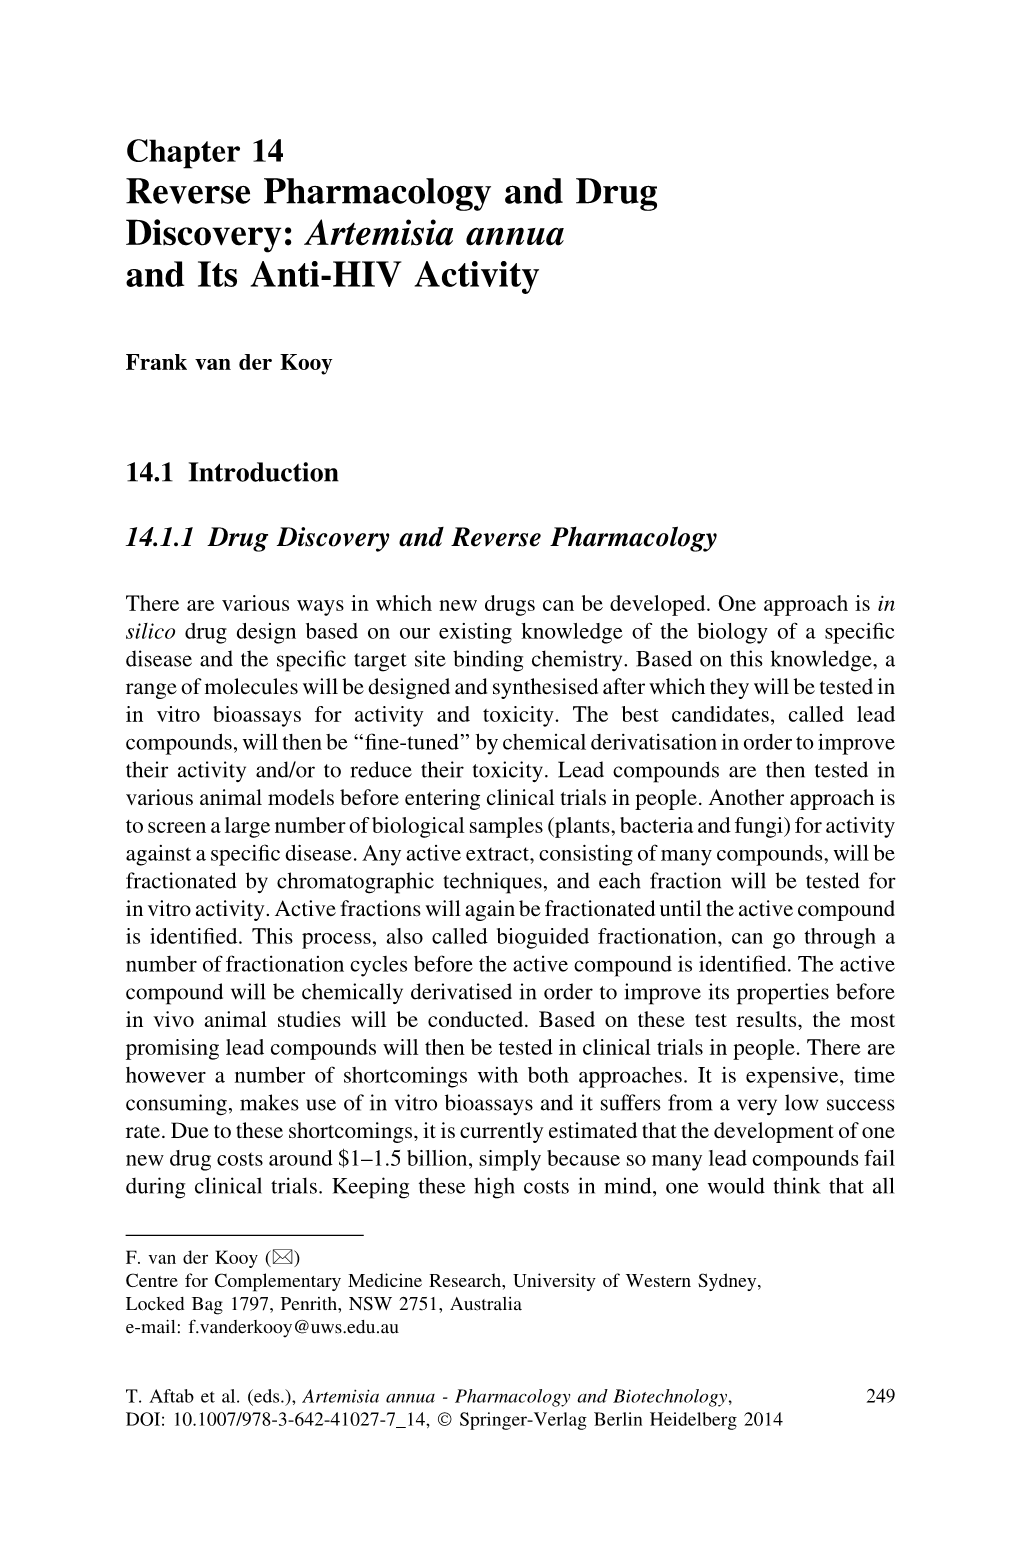 Reverse Pharmacology and Drug Discovery: Artemisia Annua and Its Anti-HIV Activity